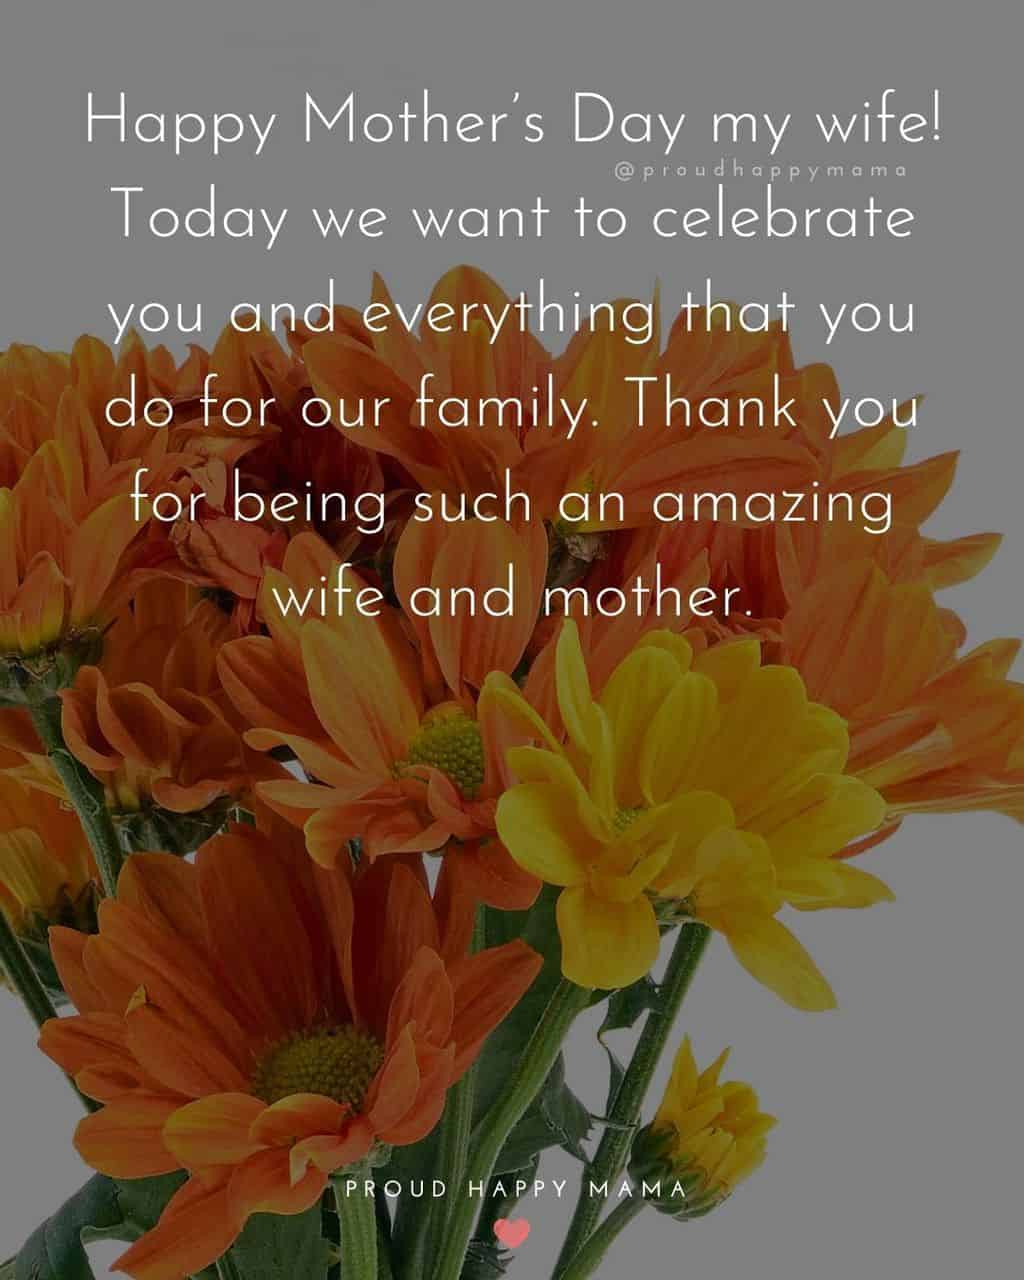 Happy Mothers Day Quotes For Wife - Happy Mother’s Day my wife! Today we want to celebrate you and everything that you do